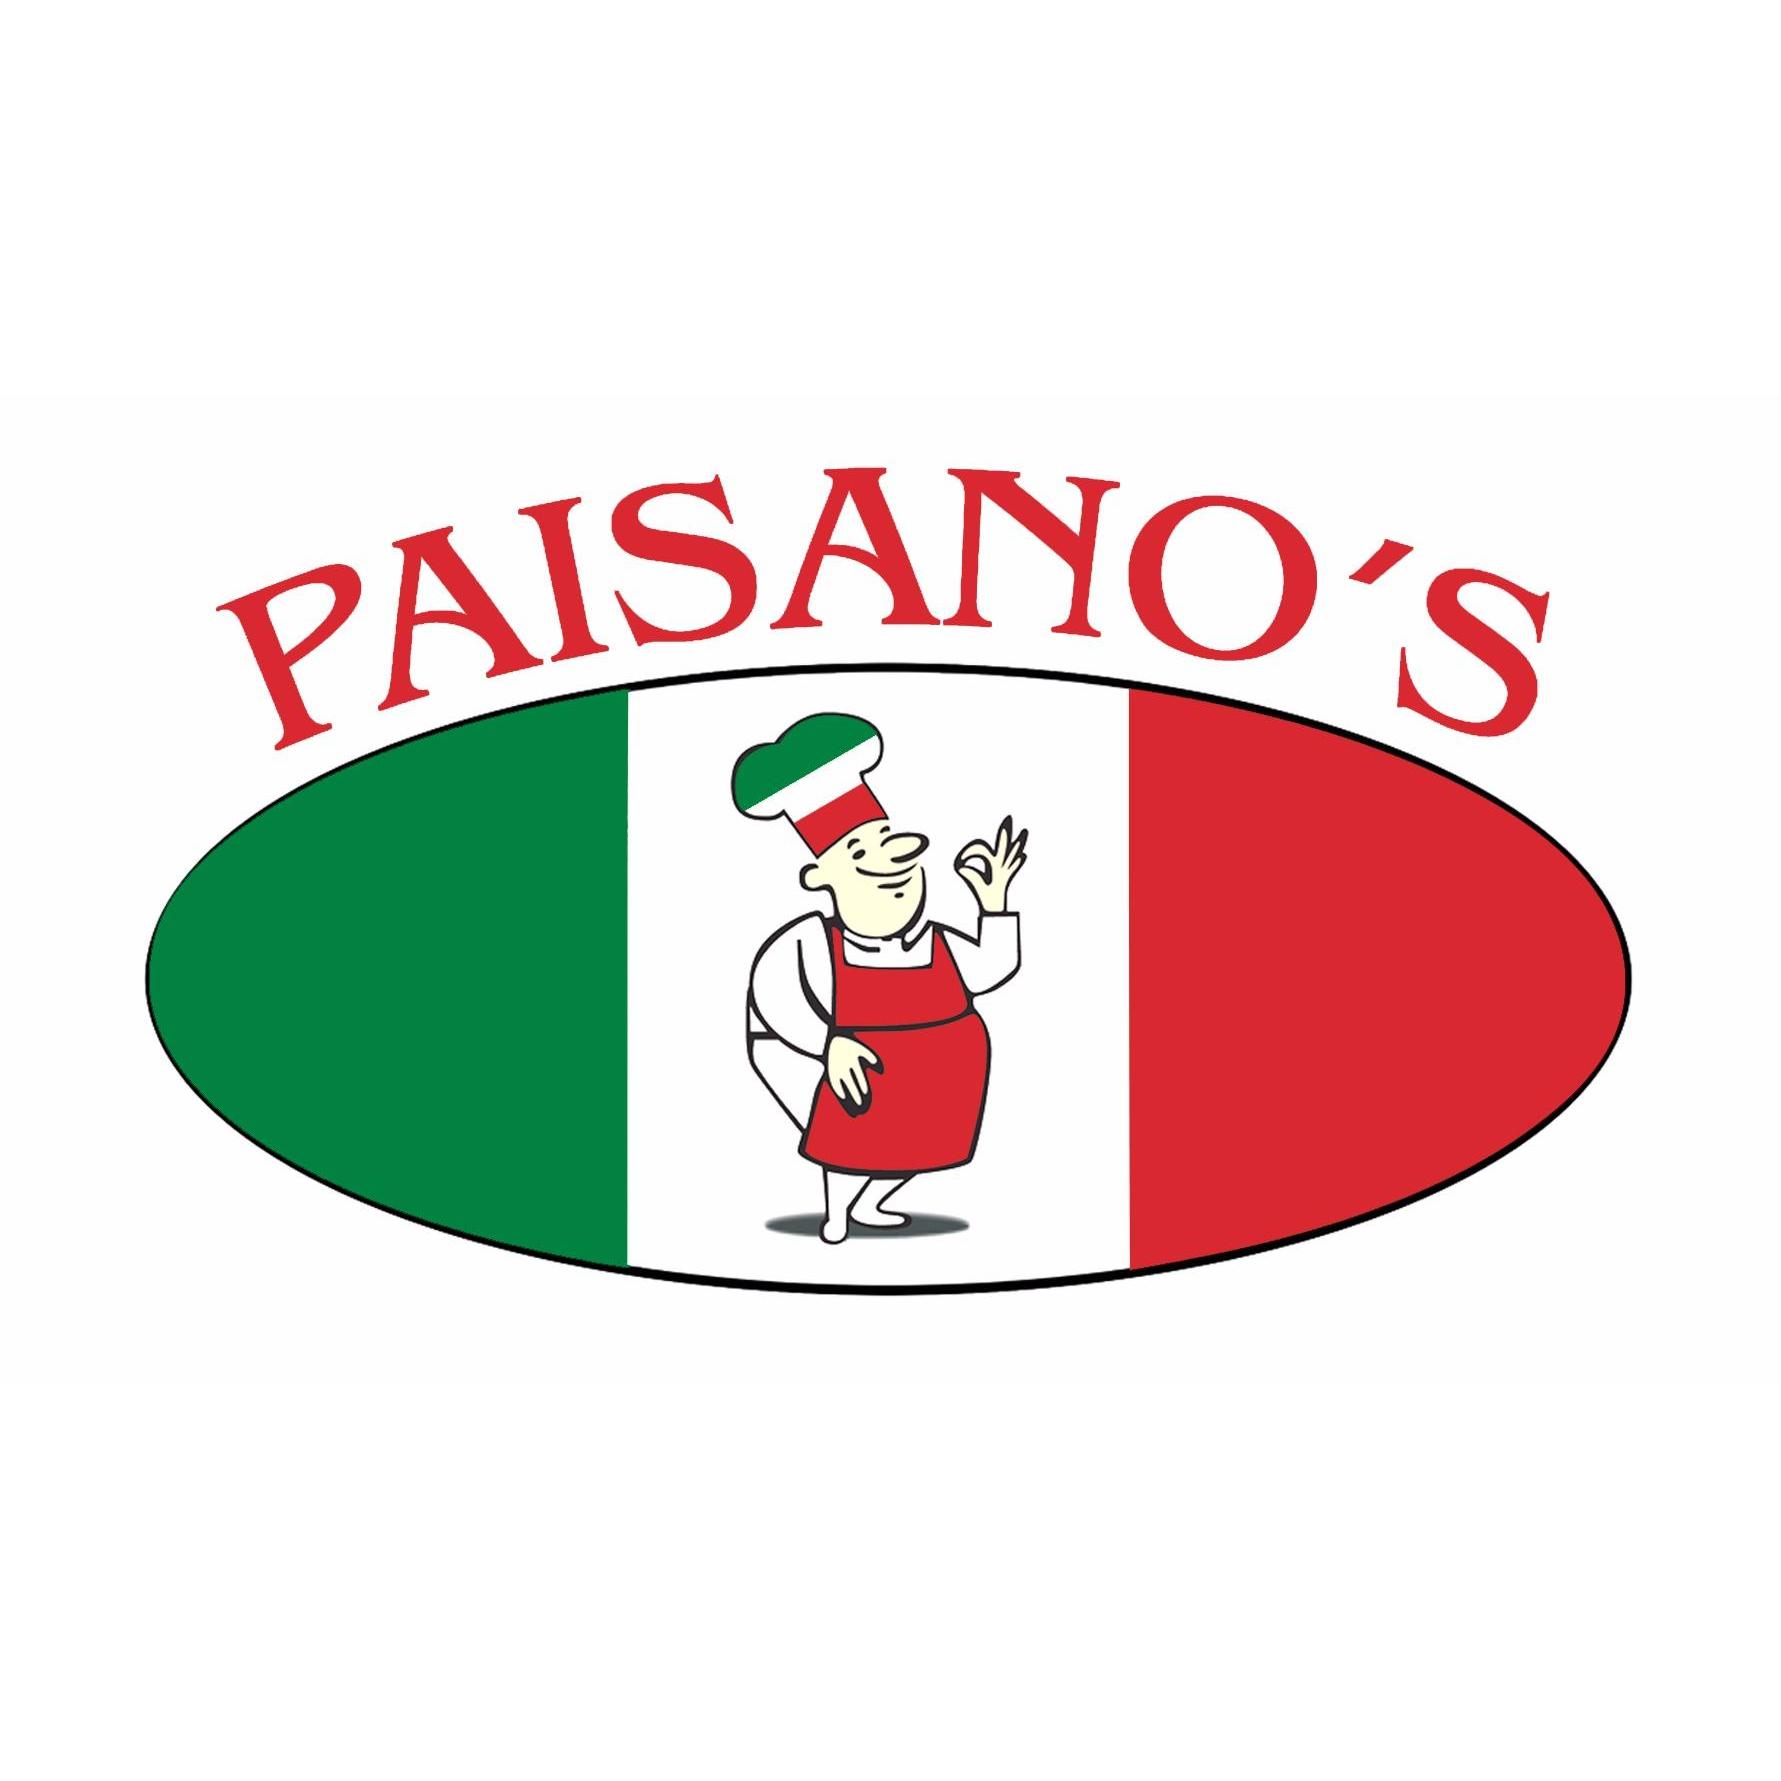 Paisano's Pizza Coupons near me in Vienna, VA 22180 | 8coupons